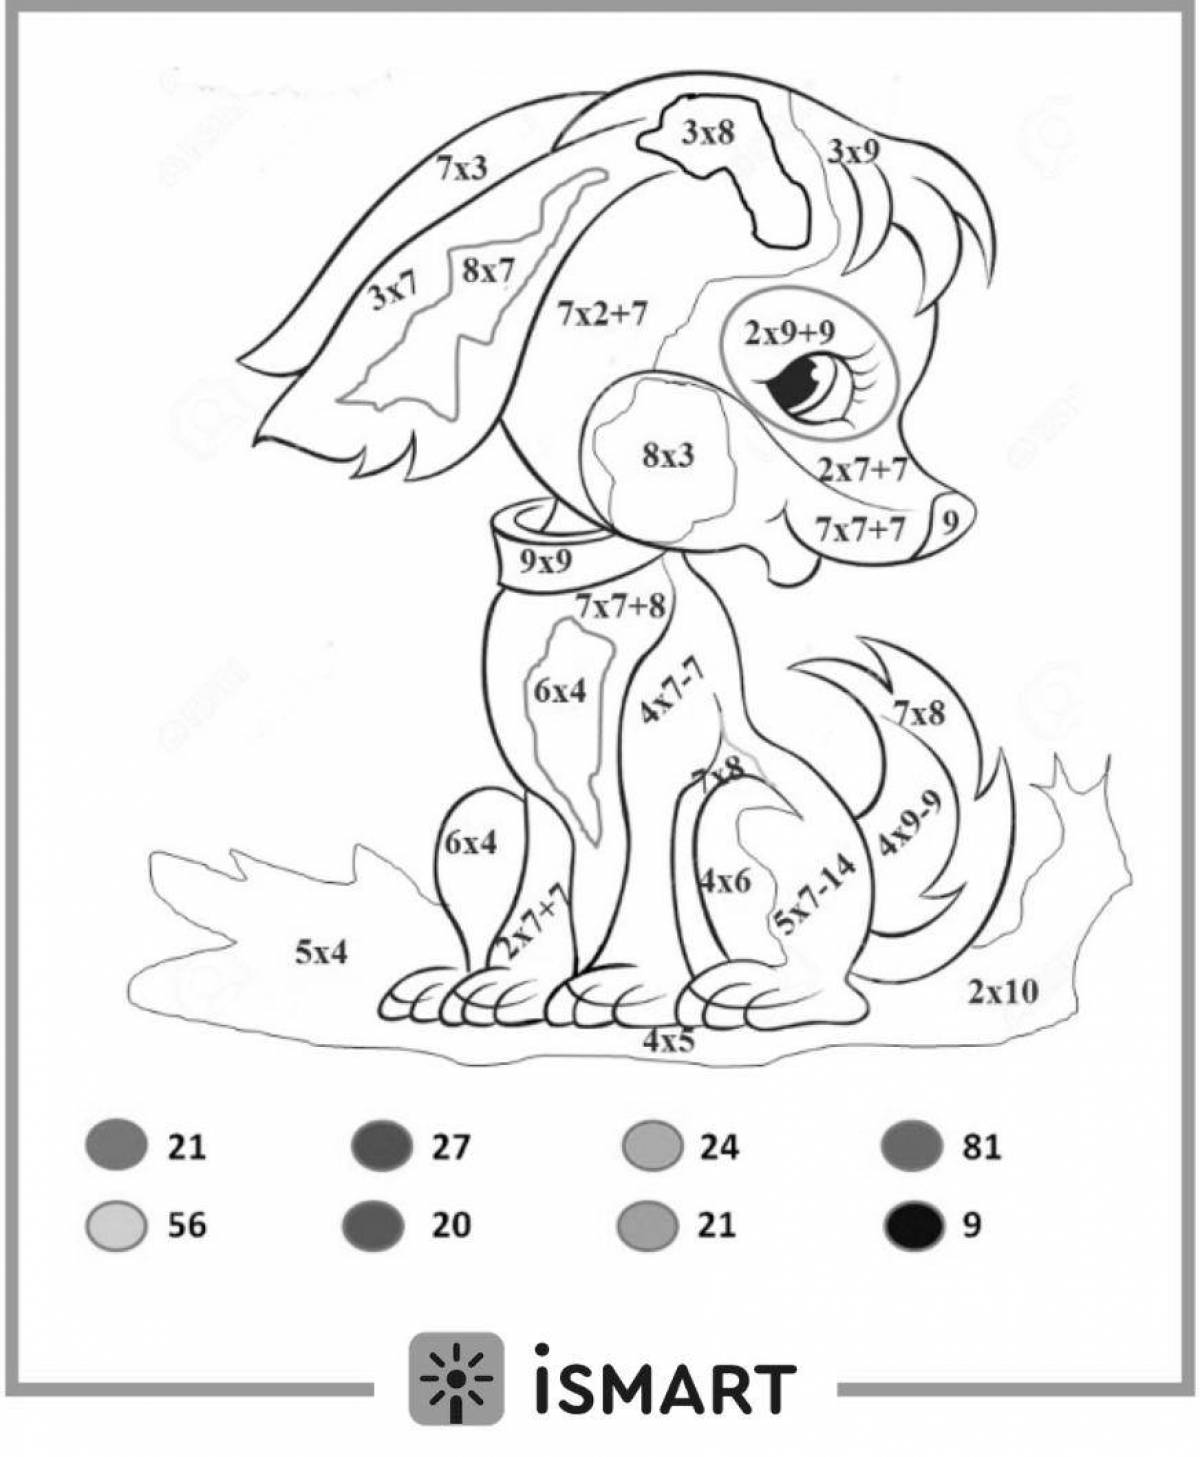 A fun coloring book for 3rd graders